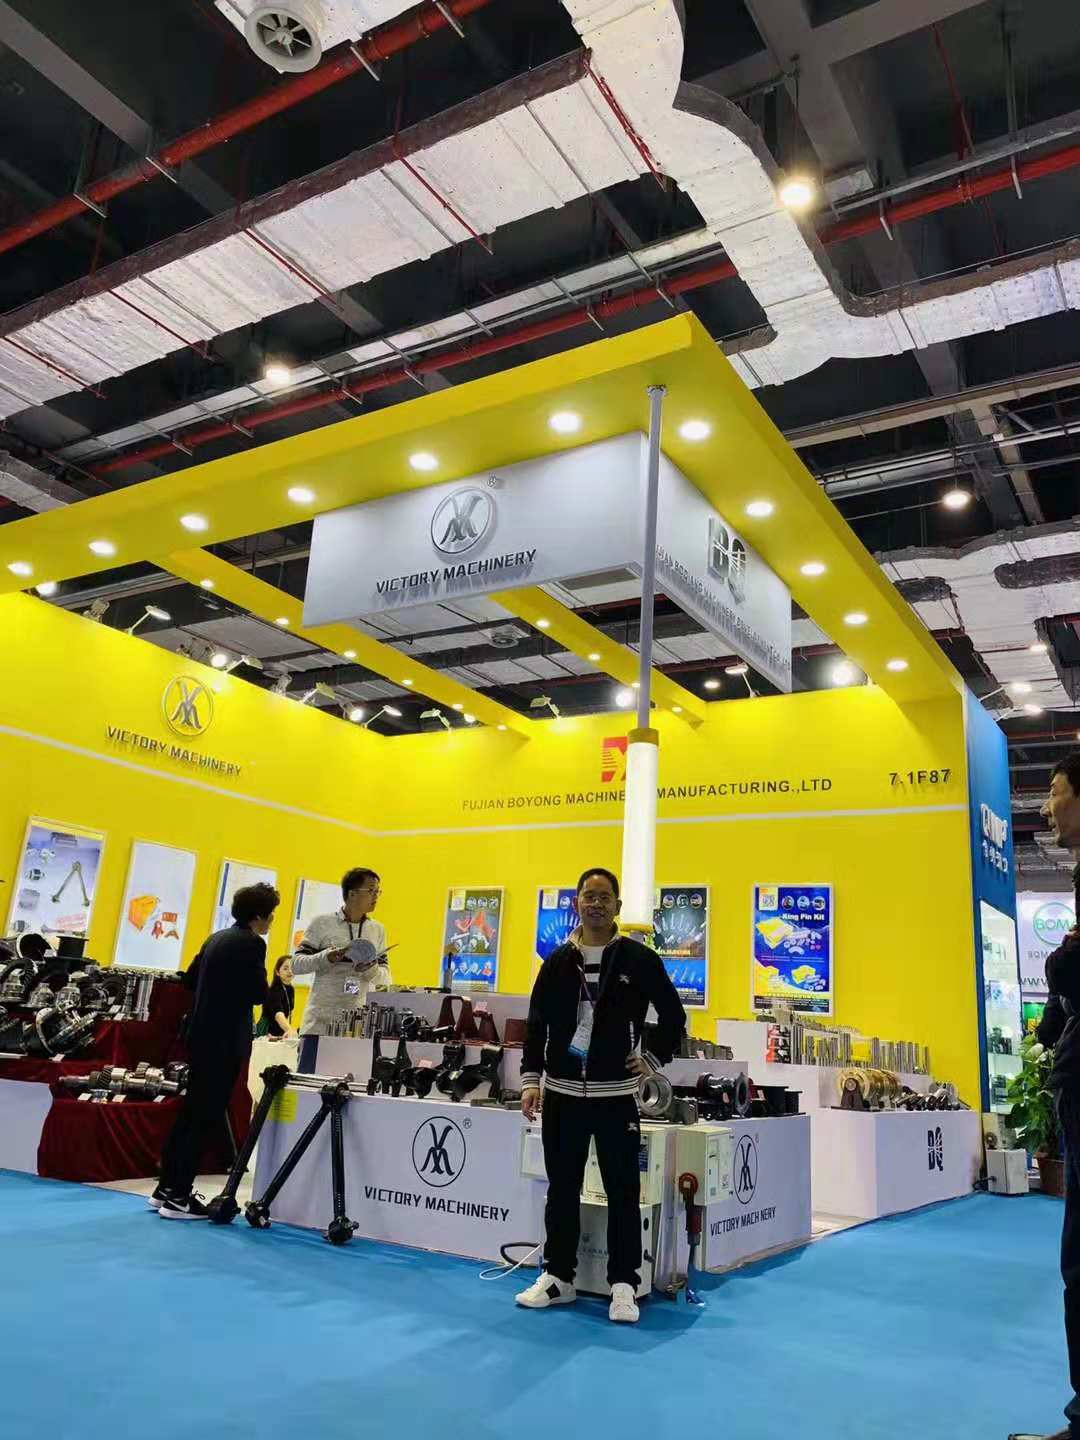 Welcome to visit Victory Machinery at Automechanika 7.1 F87